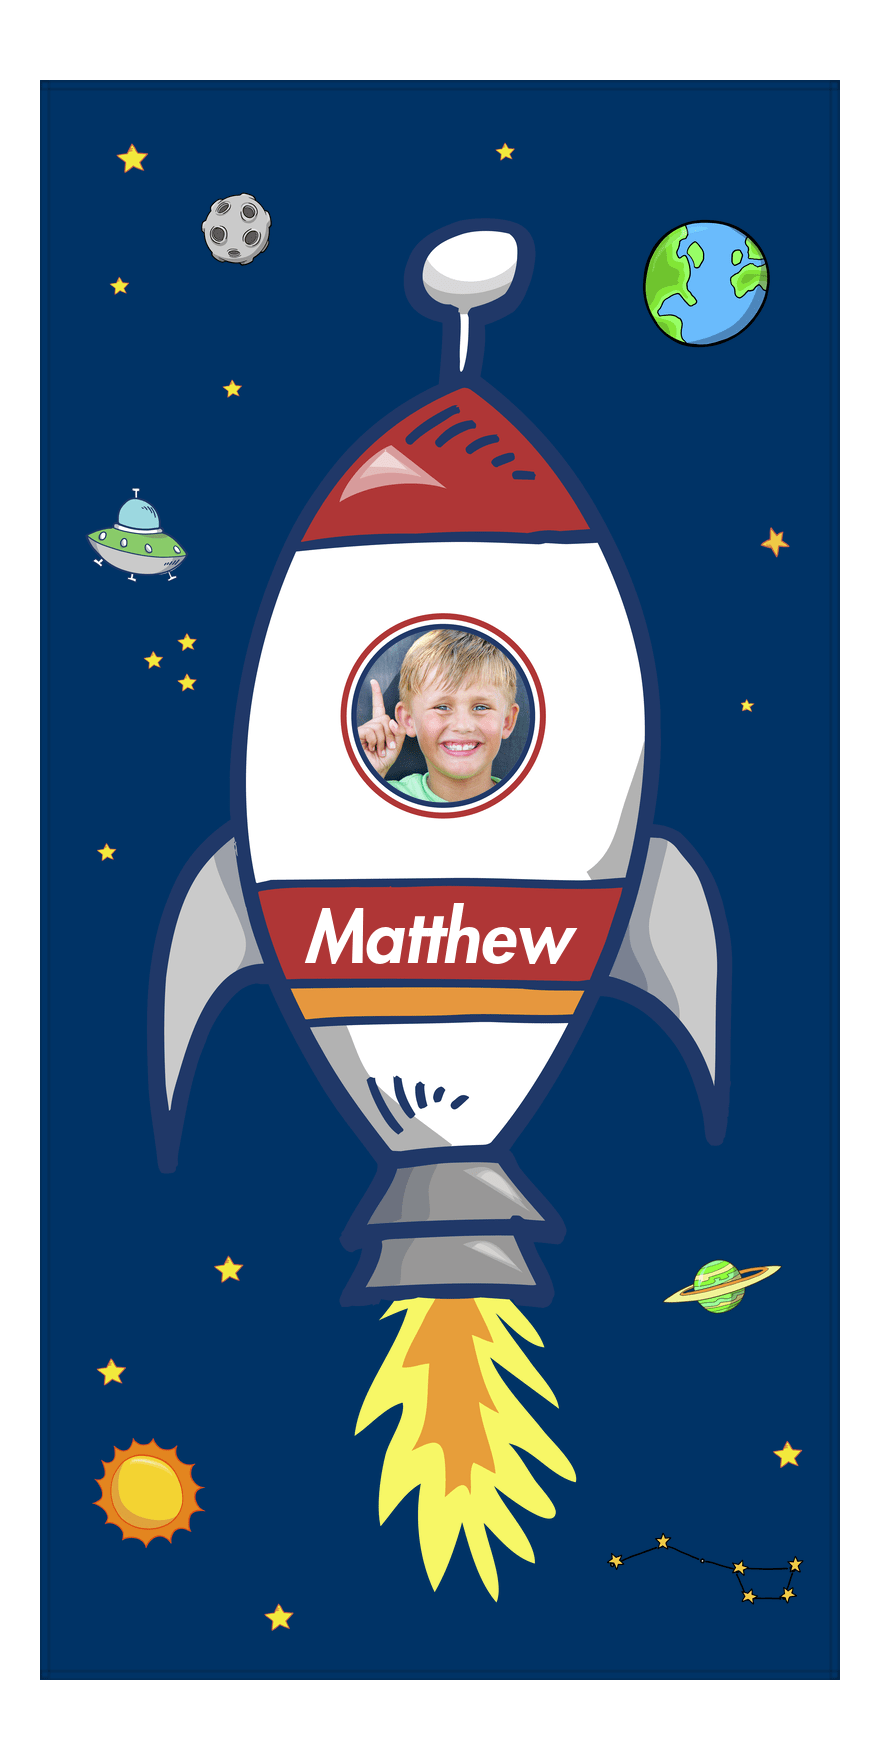 Personalized Rocket Ship Beach Towel - Upload Your Own Image - Front View